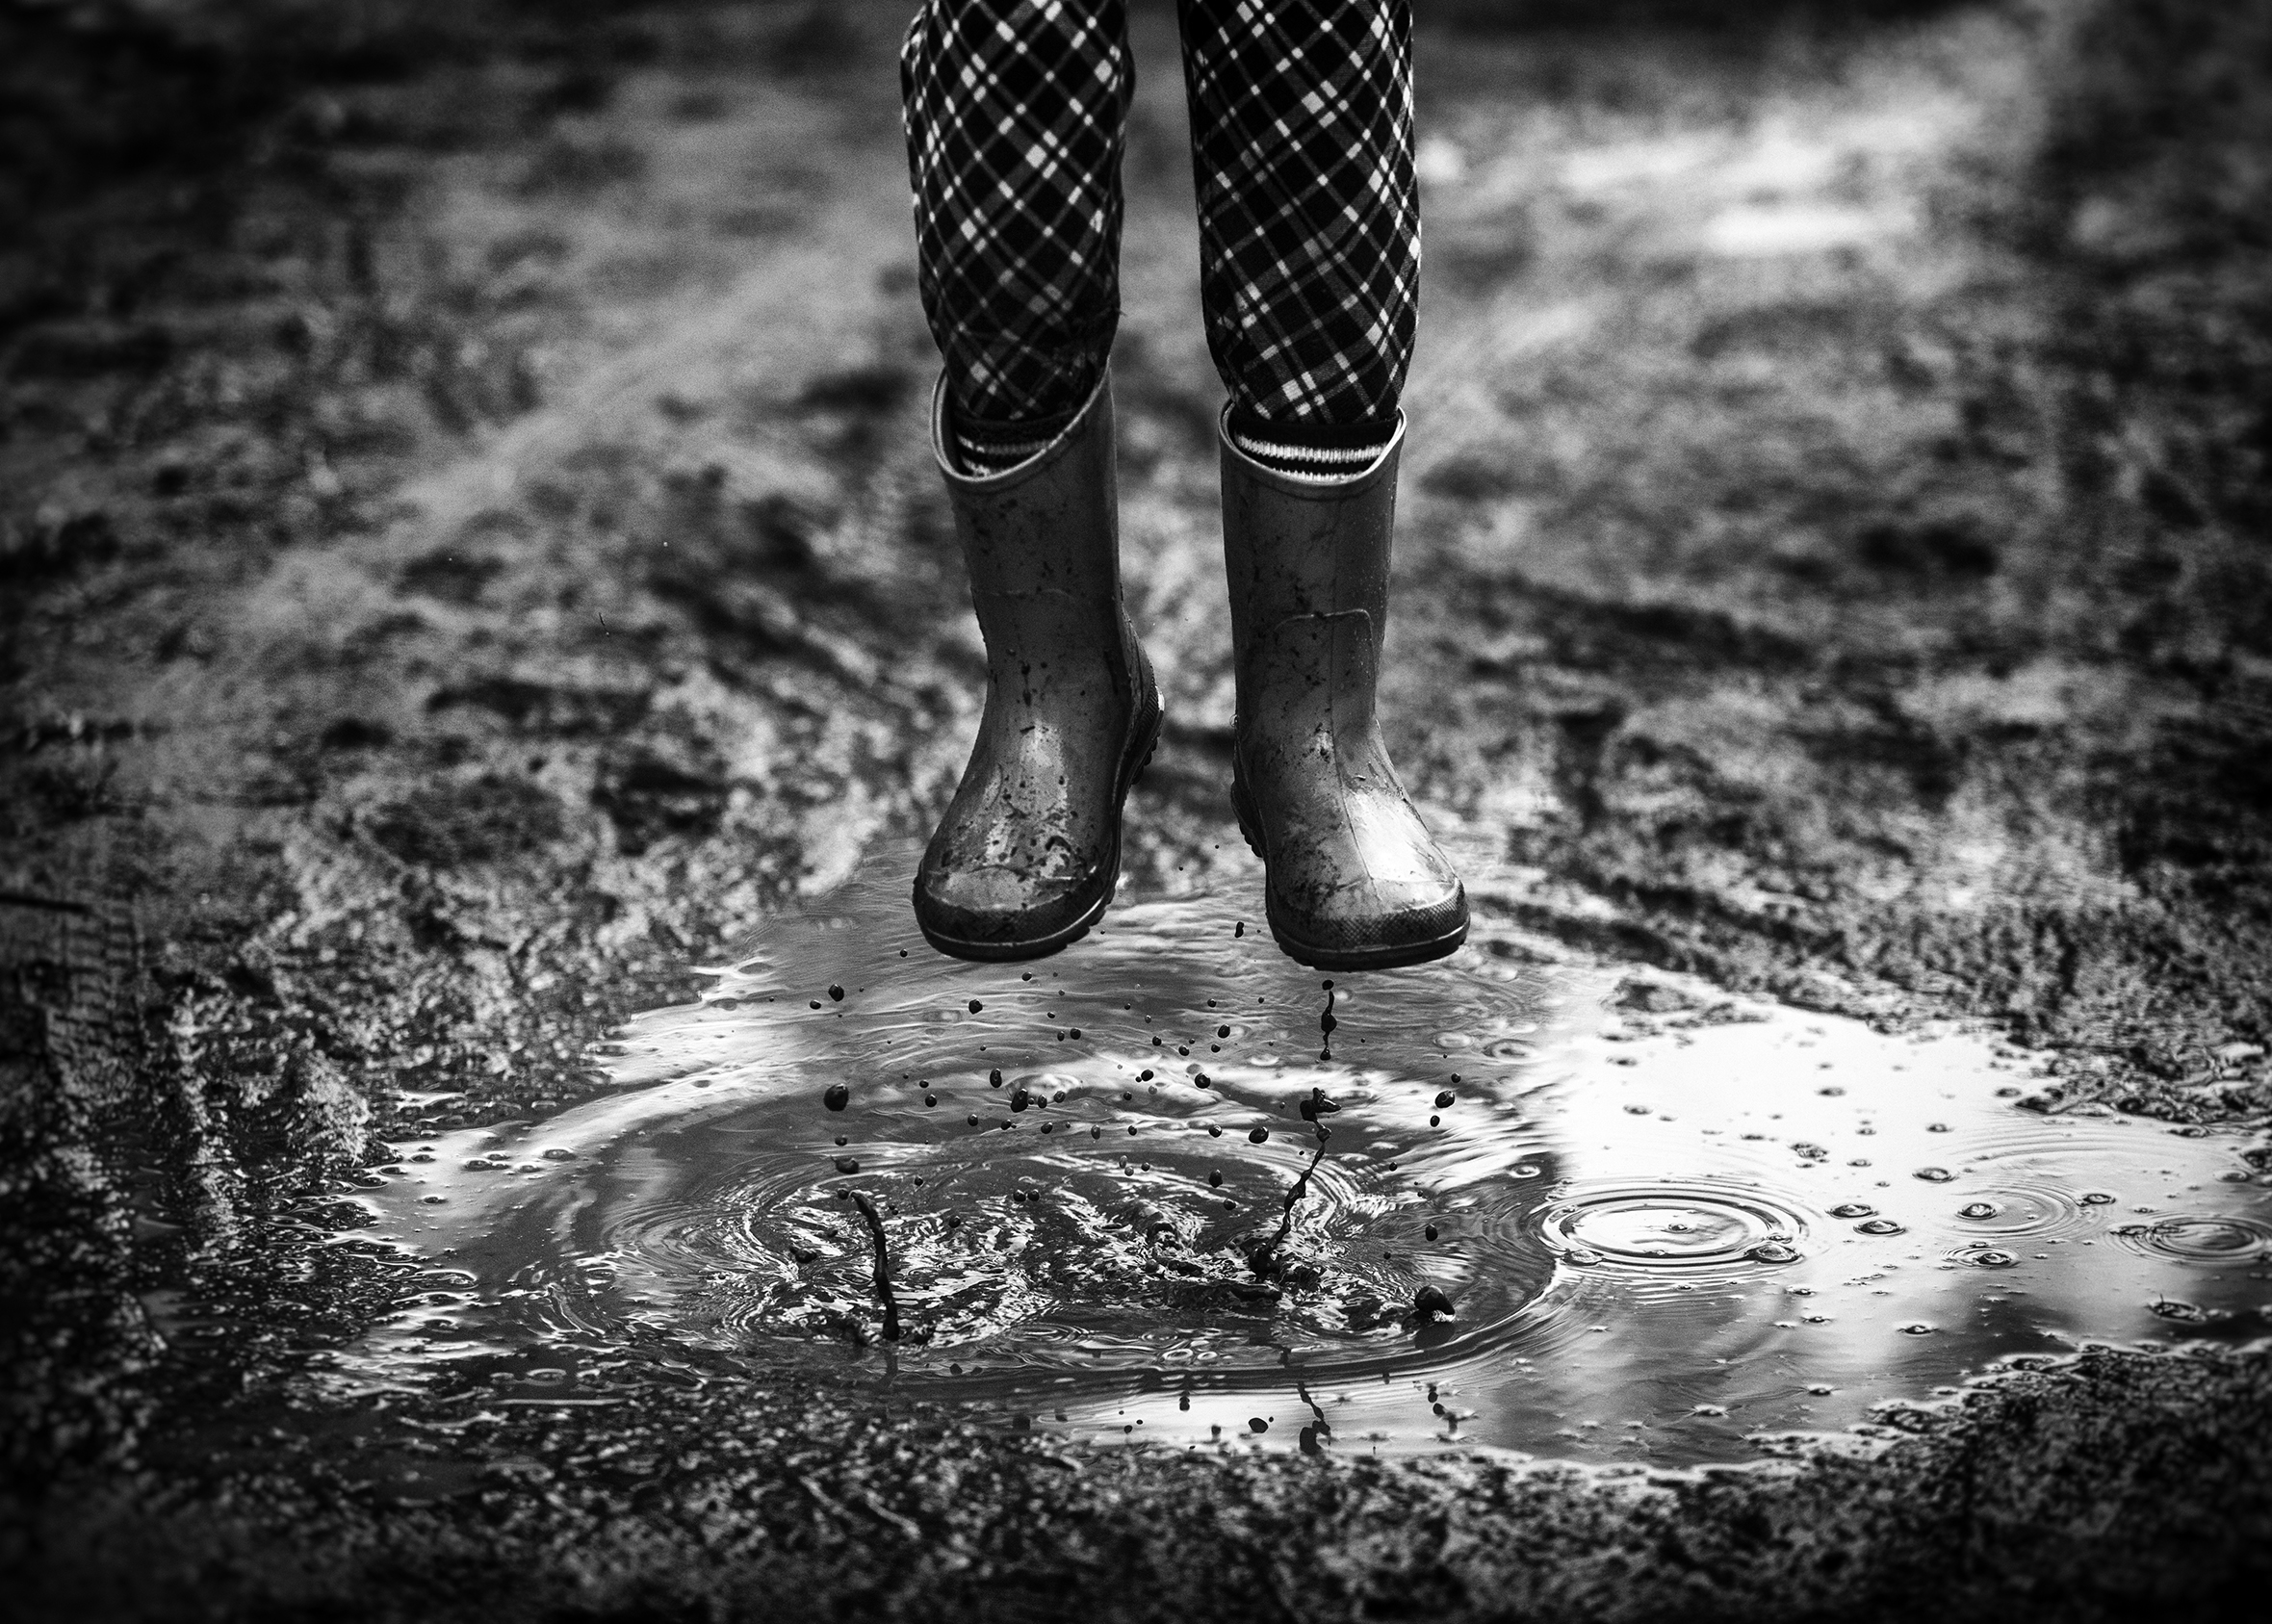 A close-up of a child’s legs with the pants tucked into rain boots taken mid-jump over a mud puddle.